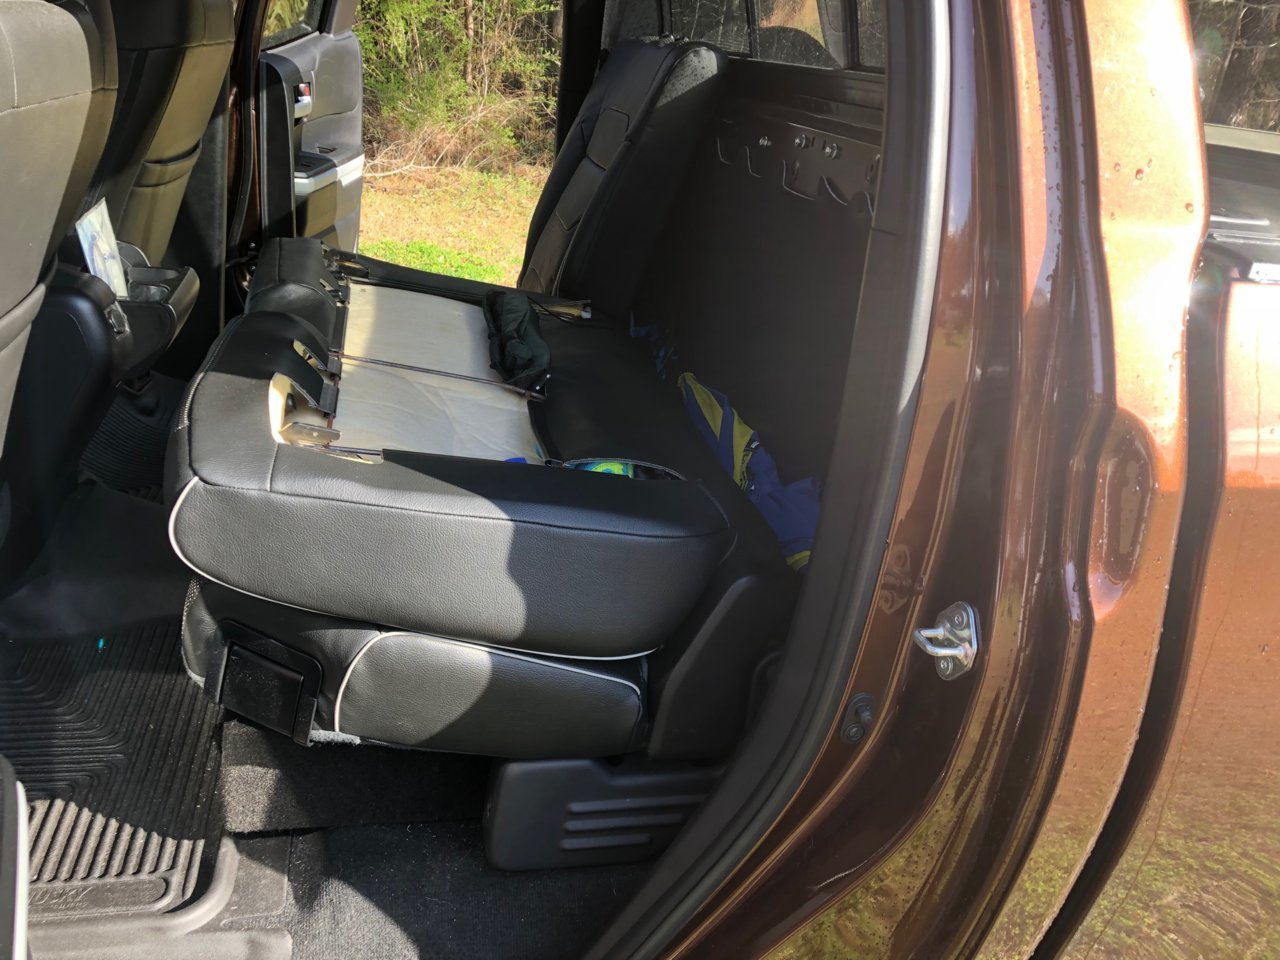 Double cabs: rear seat storage solutions | Toyota Tundra Forum